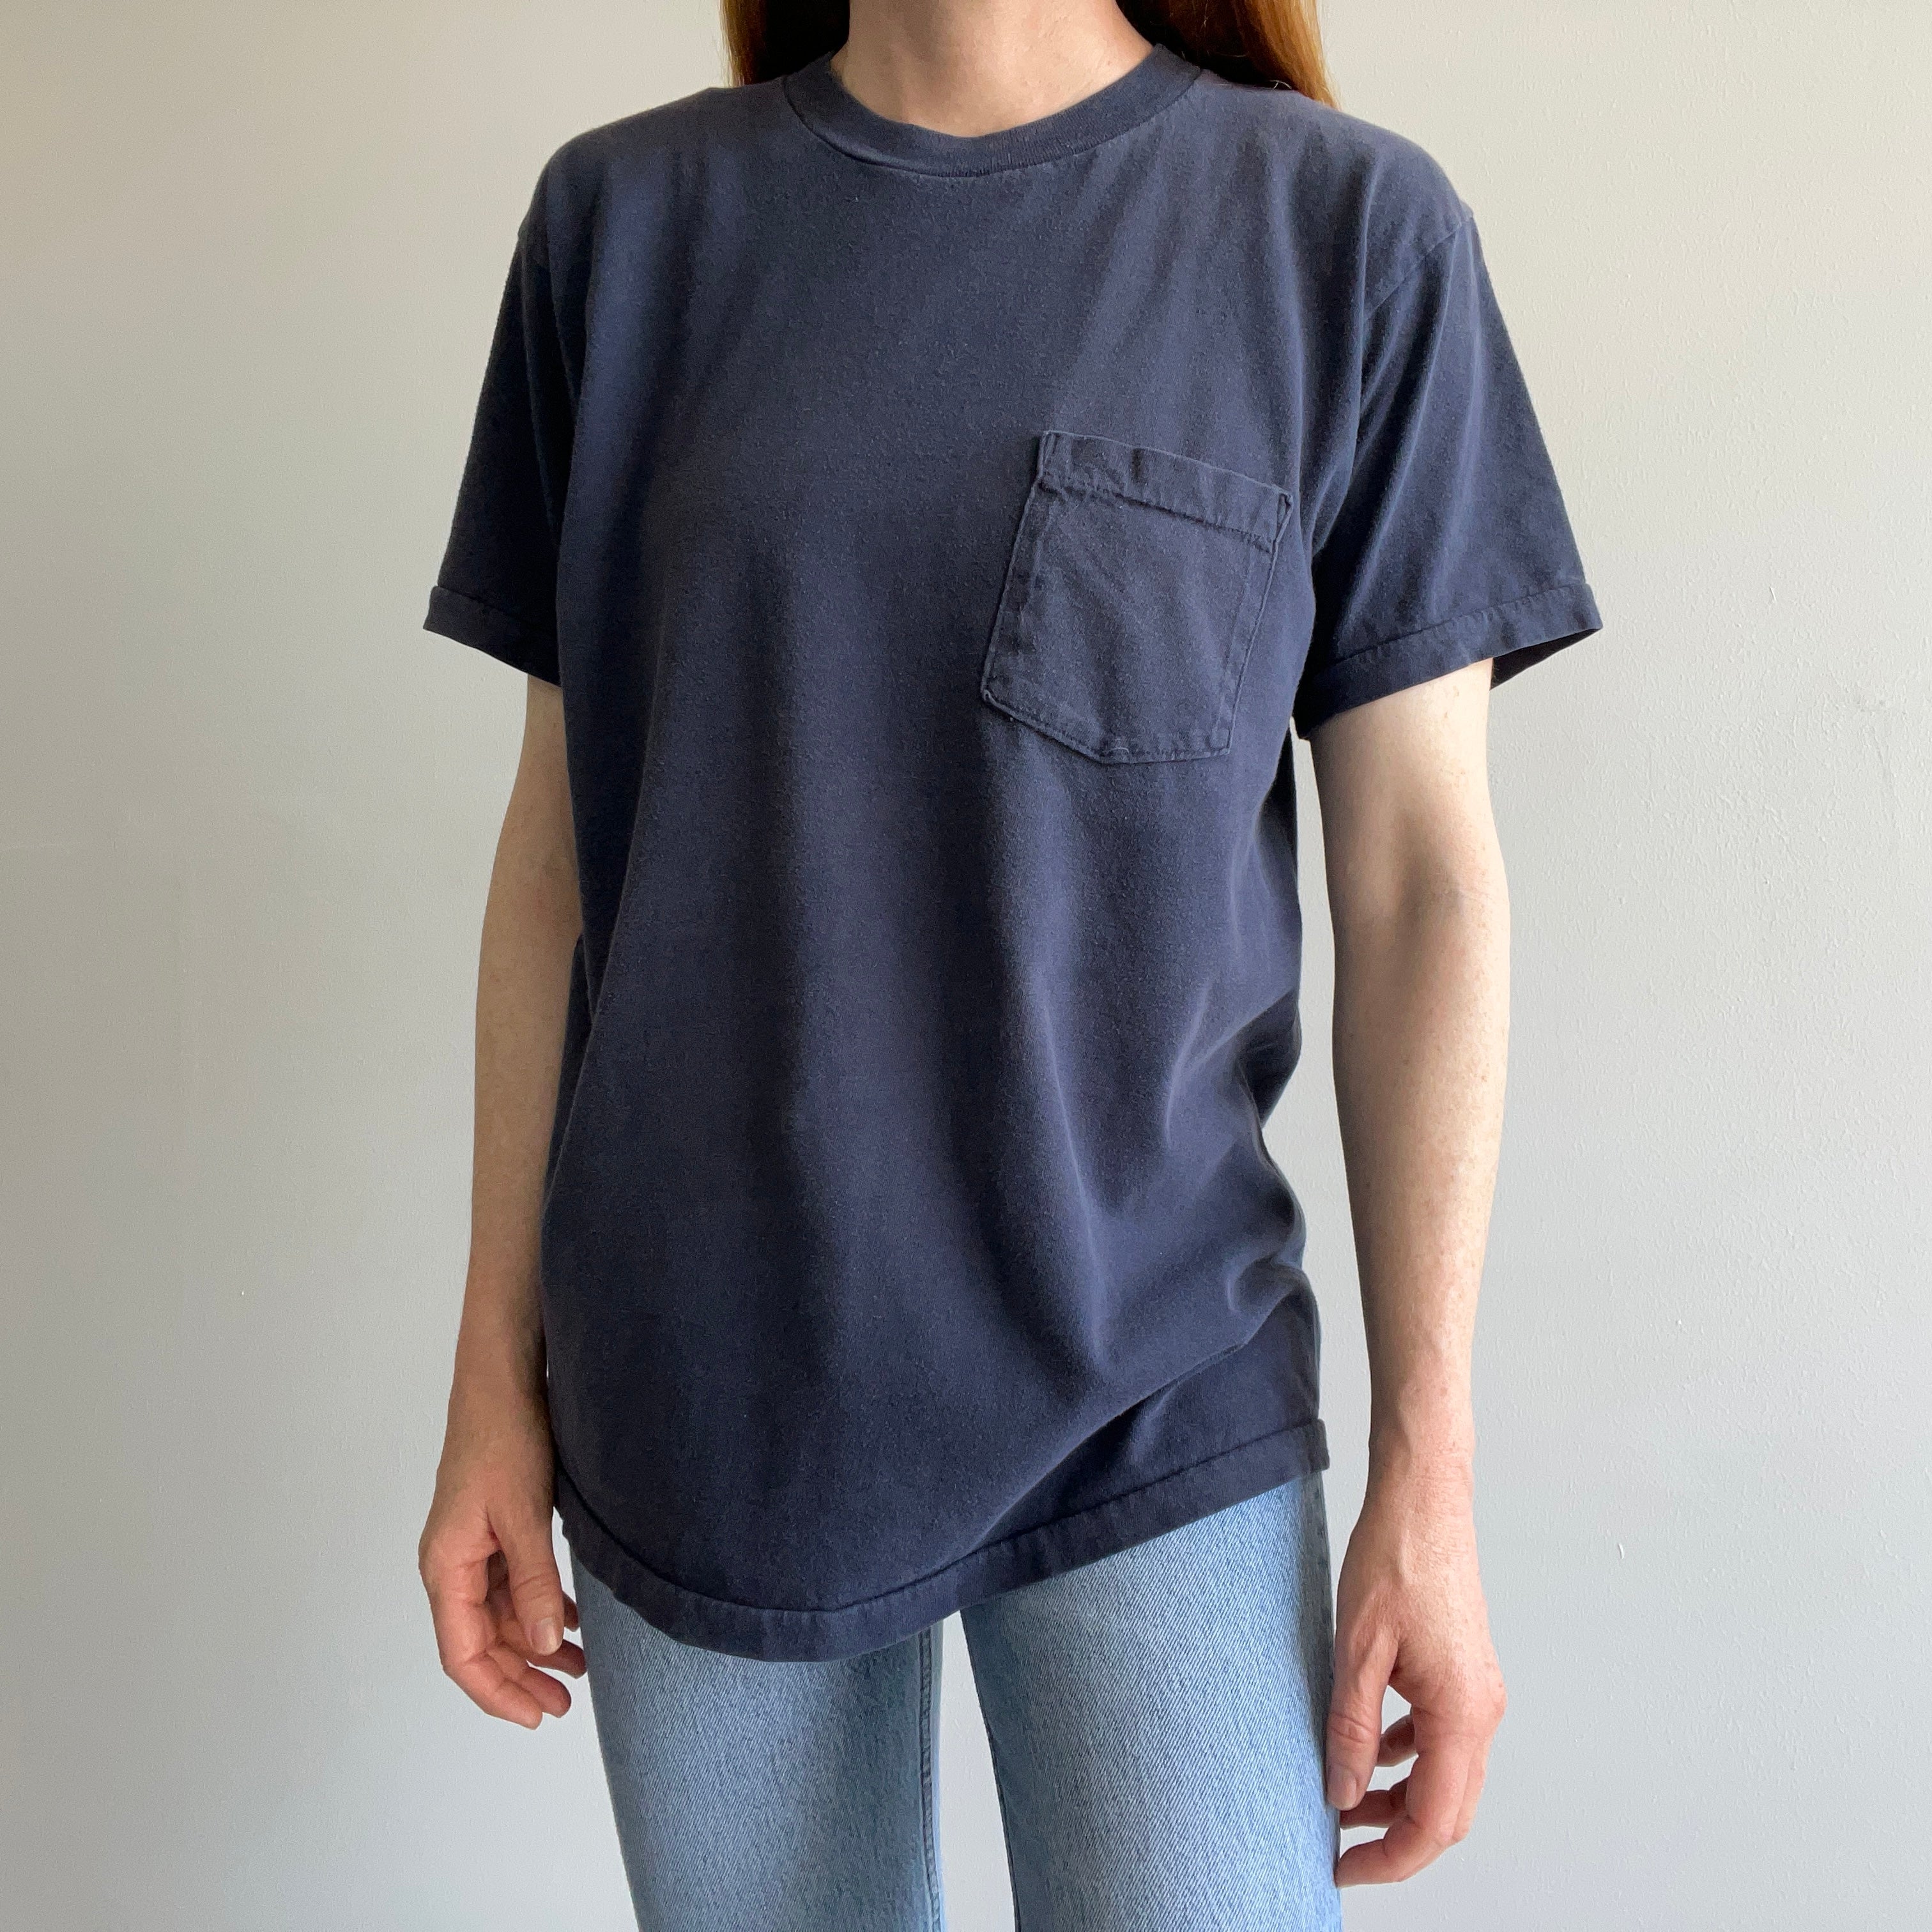 1990/2000s Blank Navy Pocket T-Shirt by Towncraft